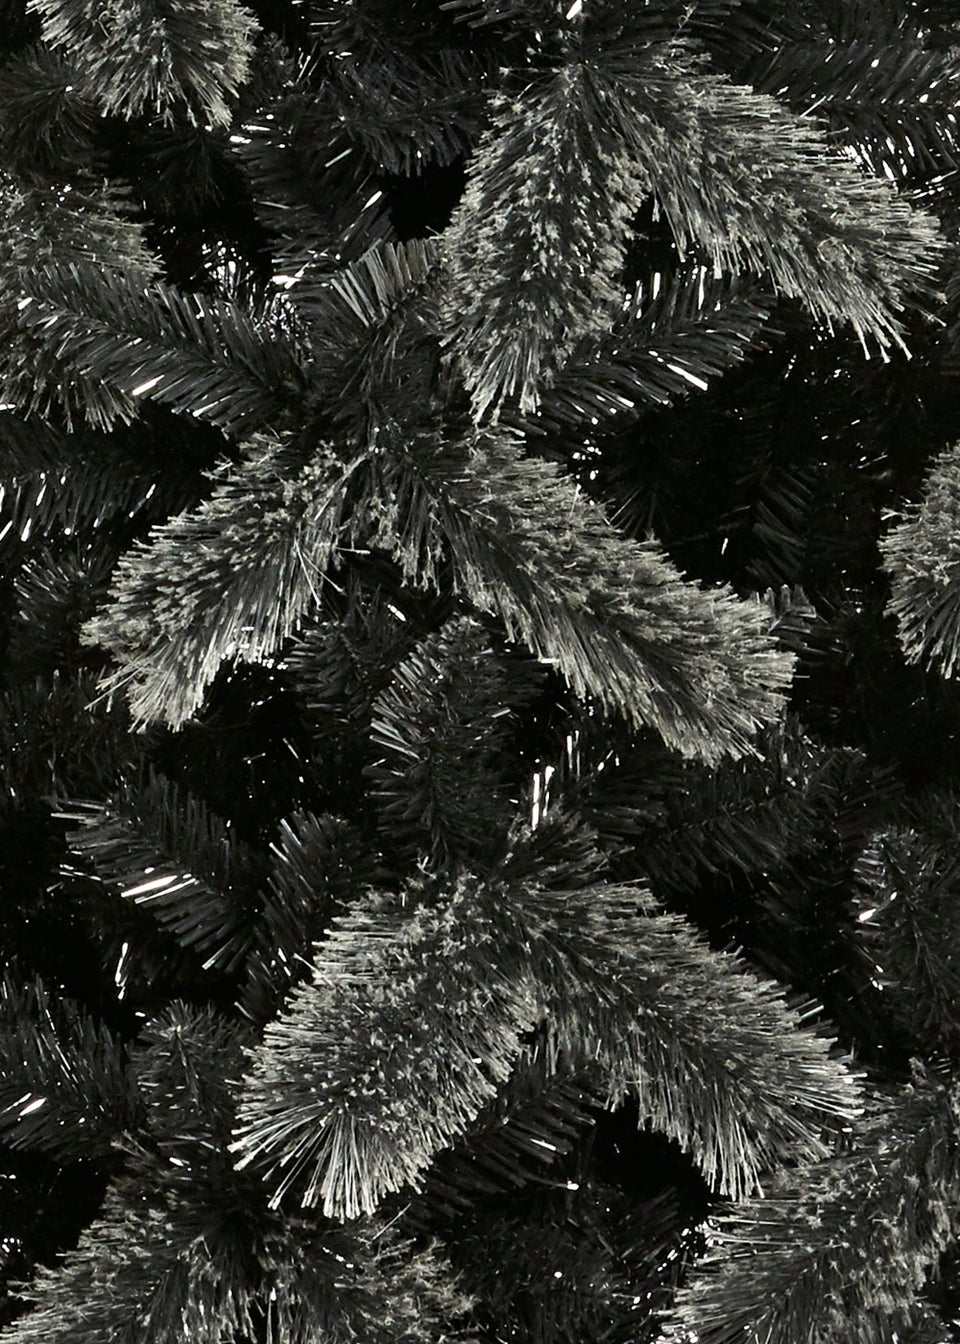 Premier Decorations Black Tipped Fir Tree 6ft